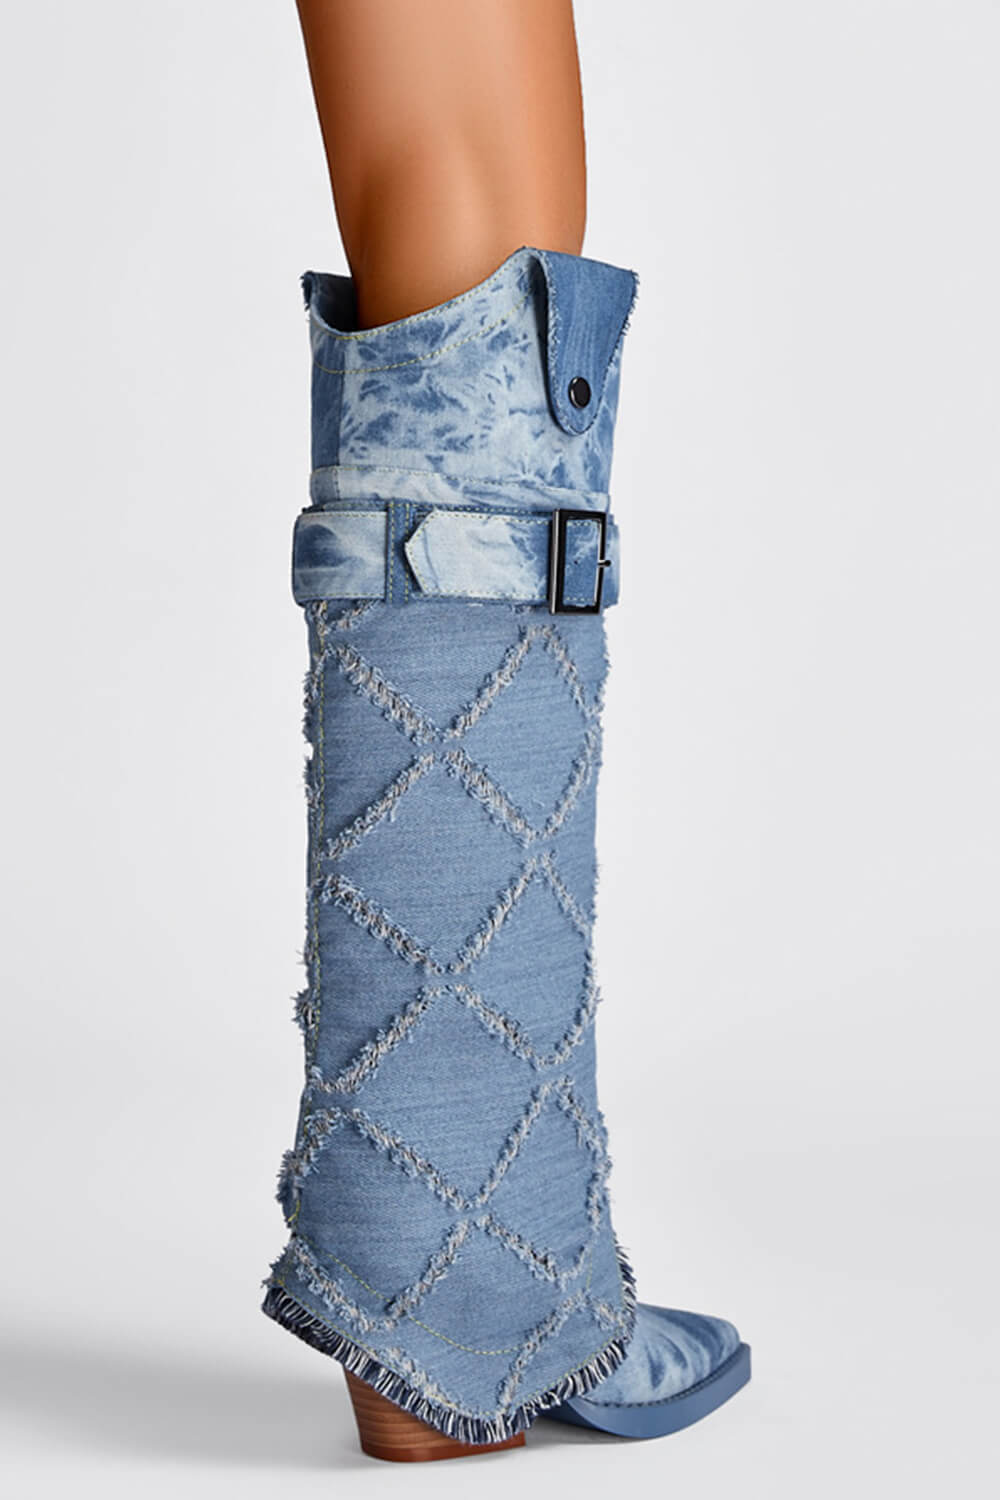 Distressed Denim Fold Over Western Knee High Boots With Buckled Belt Detailing